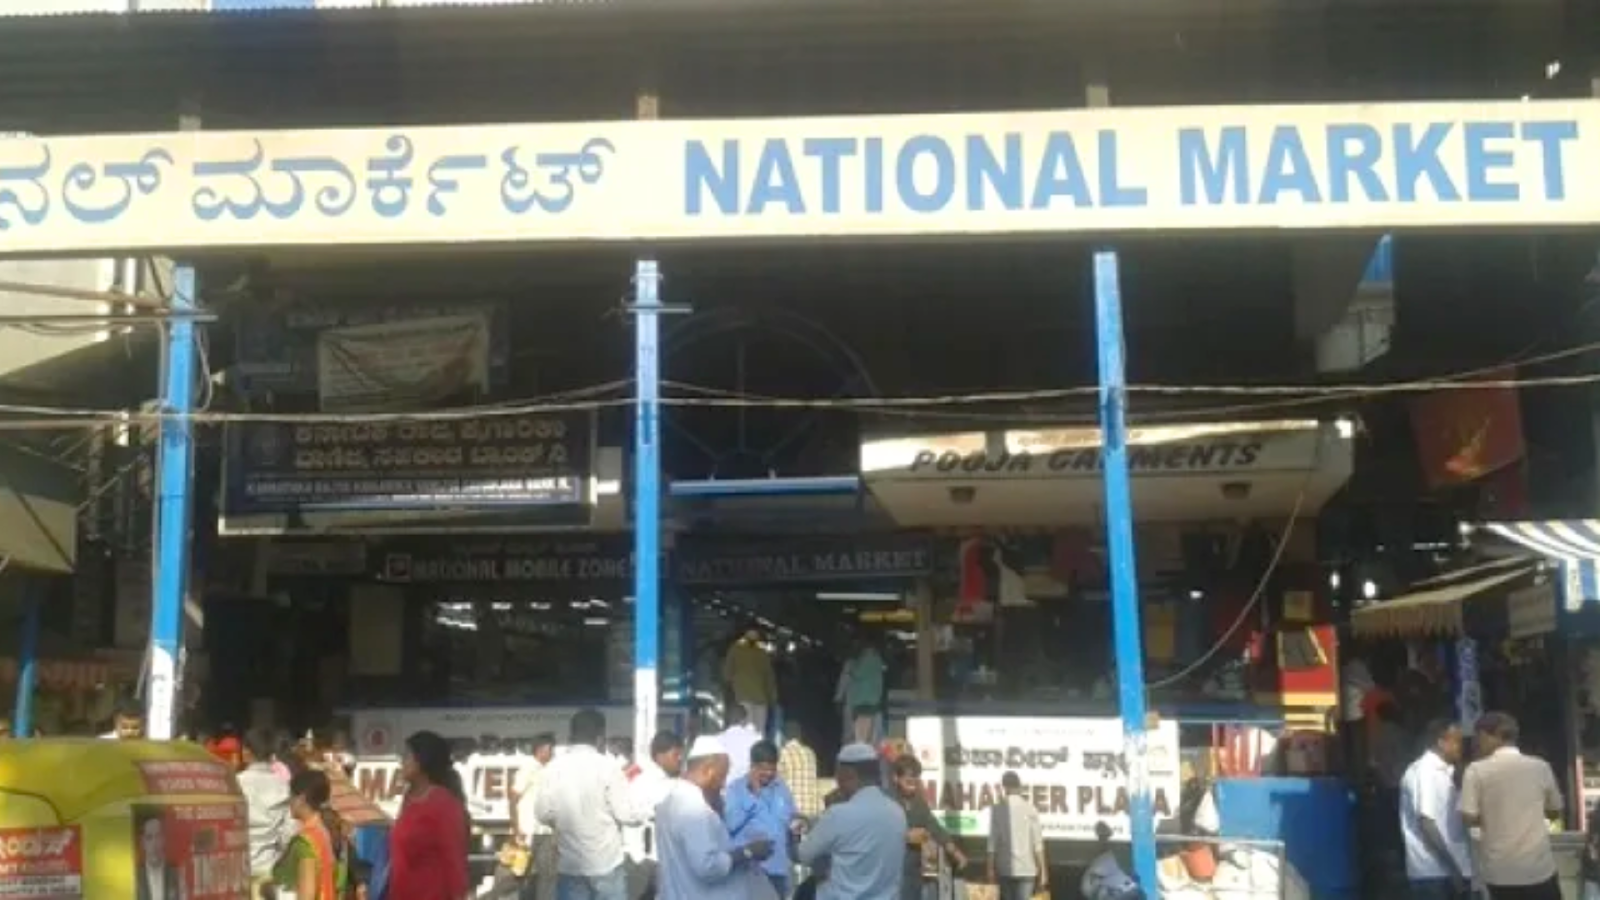 National Market specializes in textiles and unique decor items.